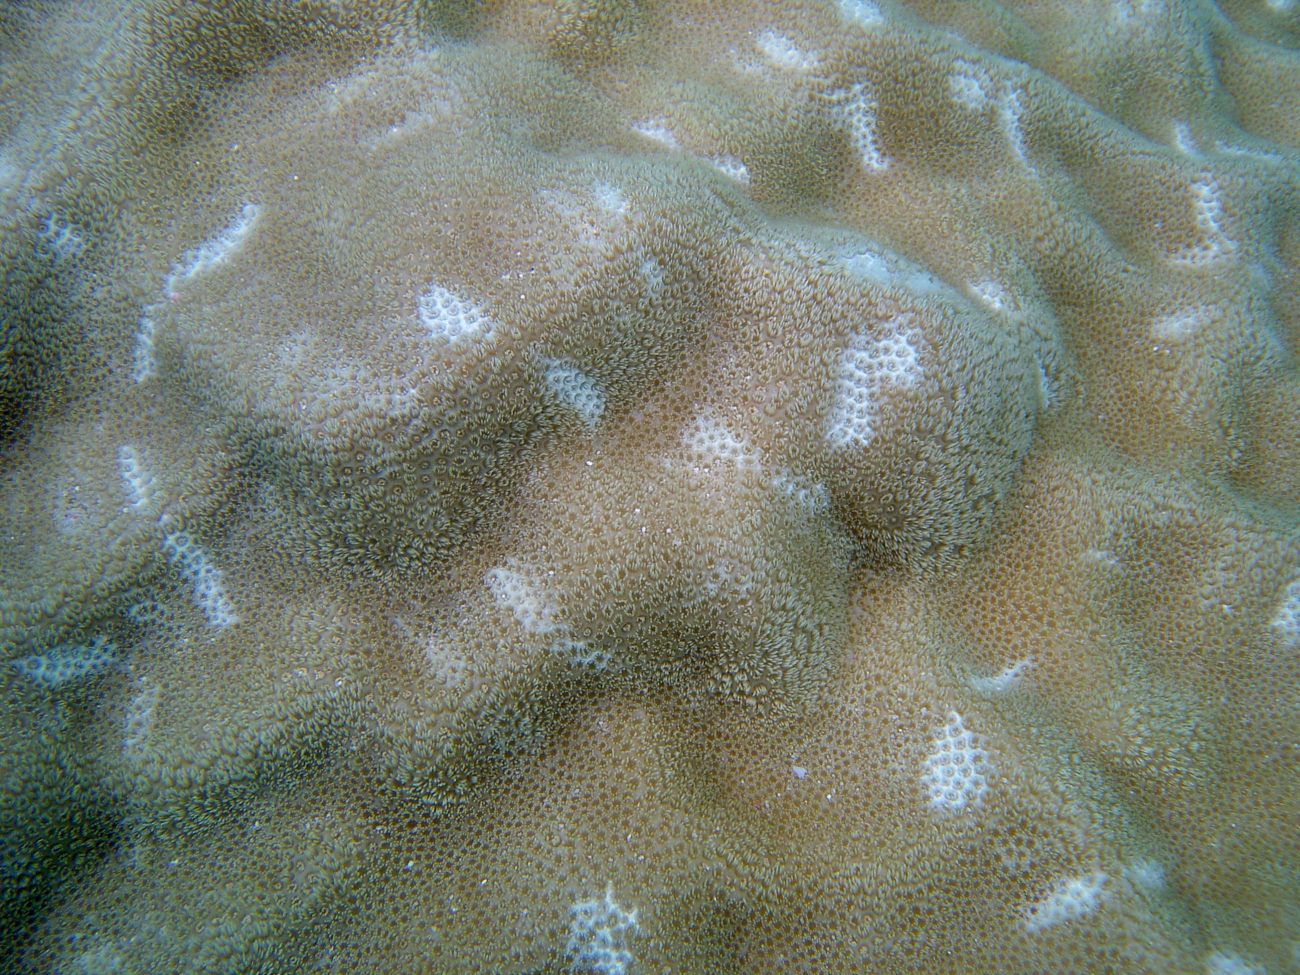 Areas of dead coral on diseased coral structure